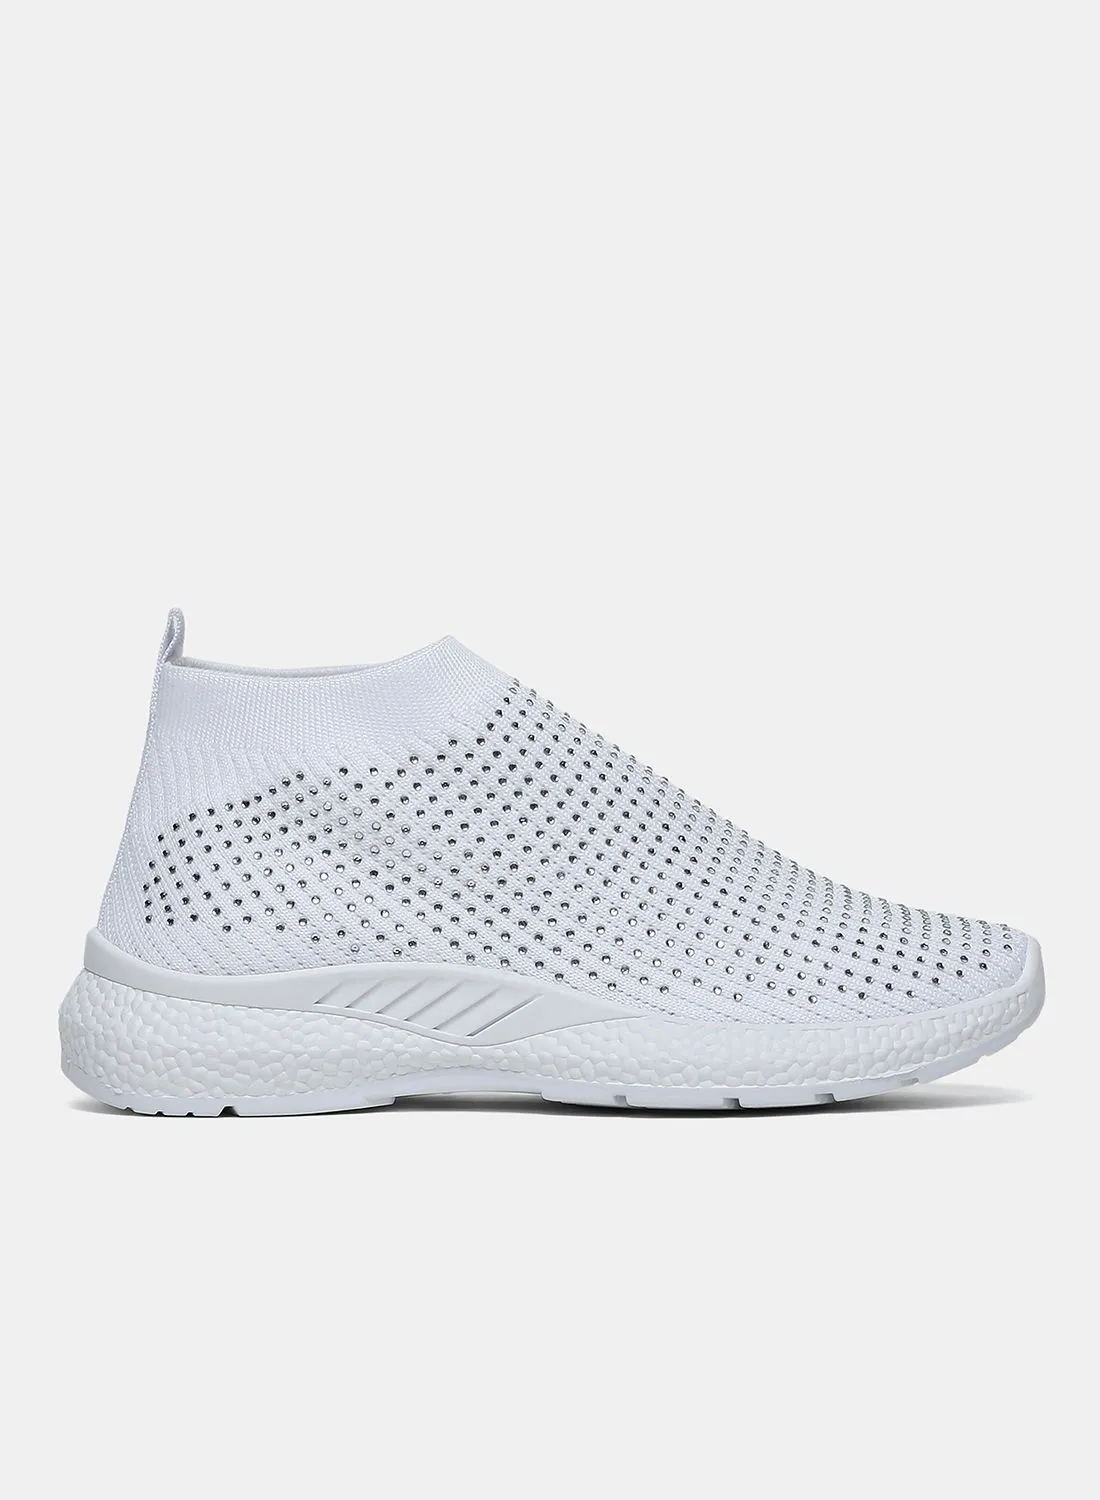 Athletiq Casual High Top Sneakers White